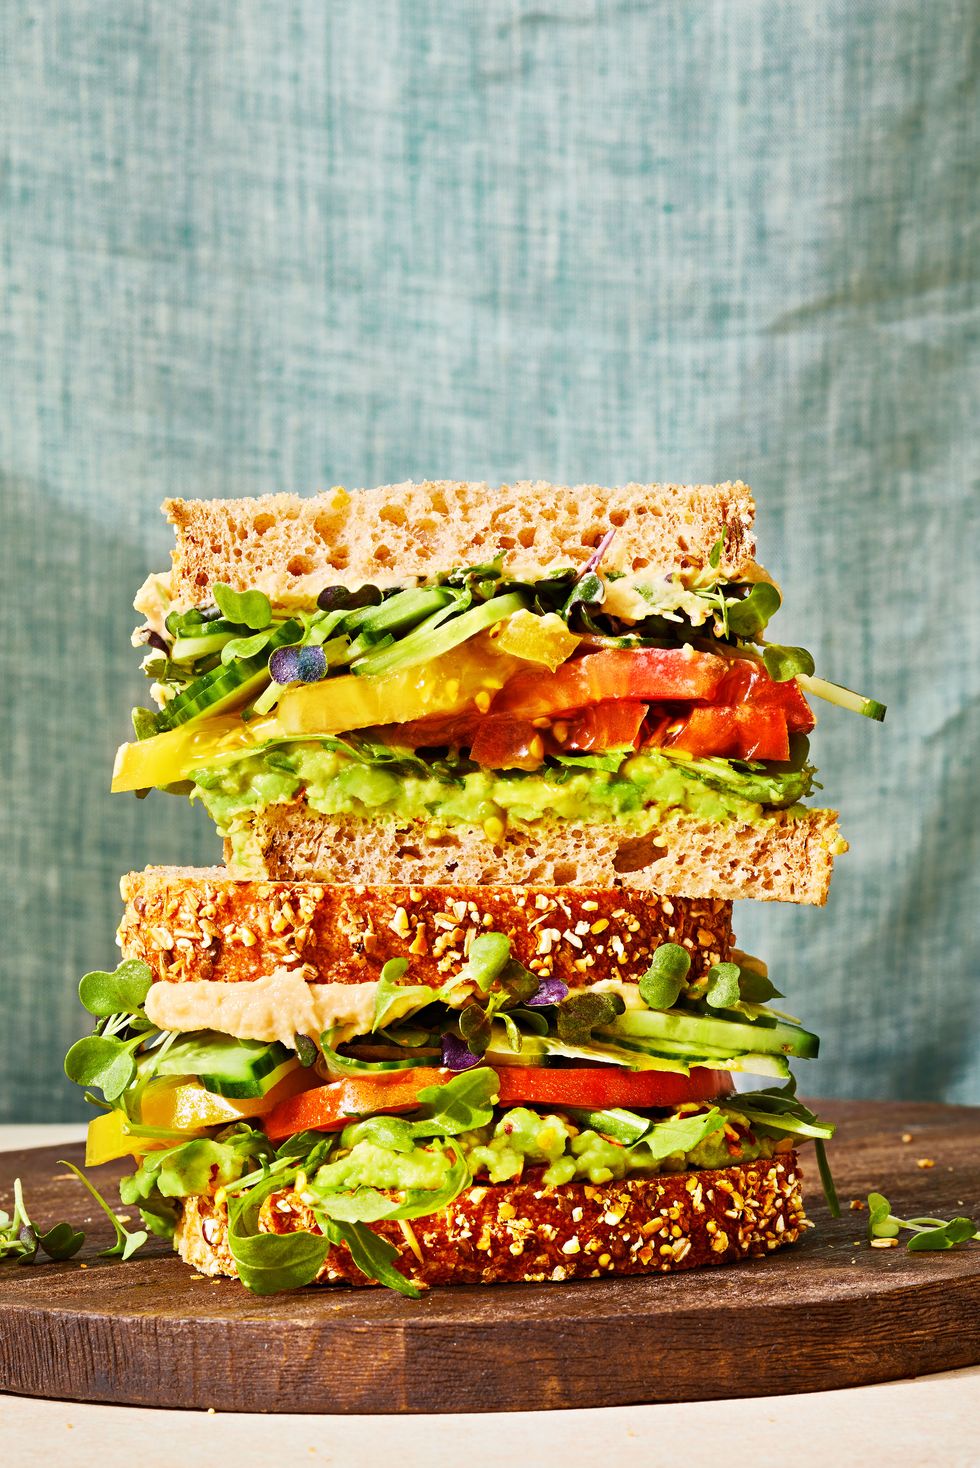 https://hips.hearstapps.com/hmg-prod/images/fully-loaded-veggie-sandwiches-6552a30fa4974.jpg?crop=0.827xw:0.826xh;0.0688xw,0.0903xh&resize=980:*